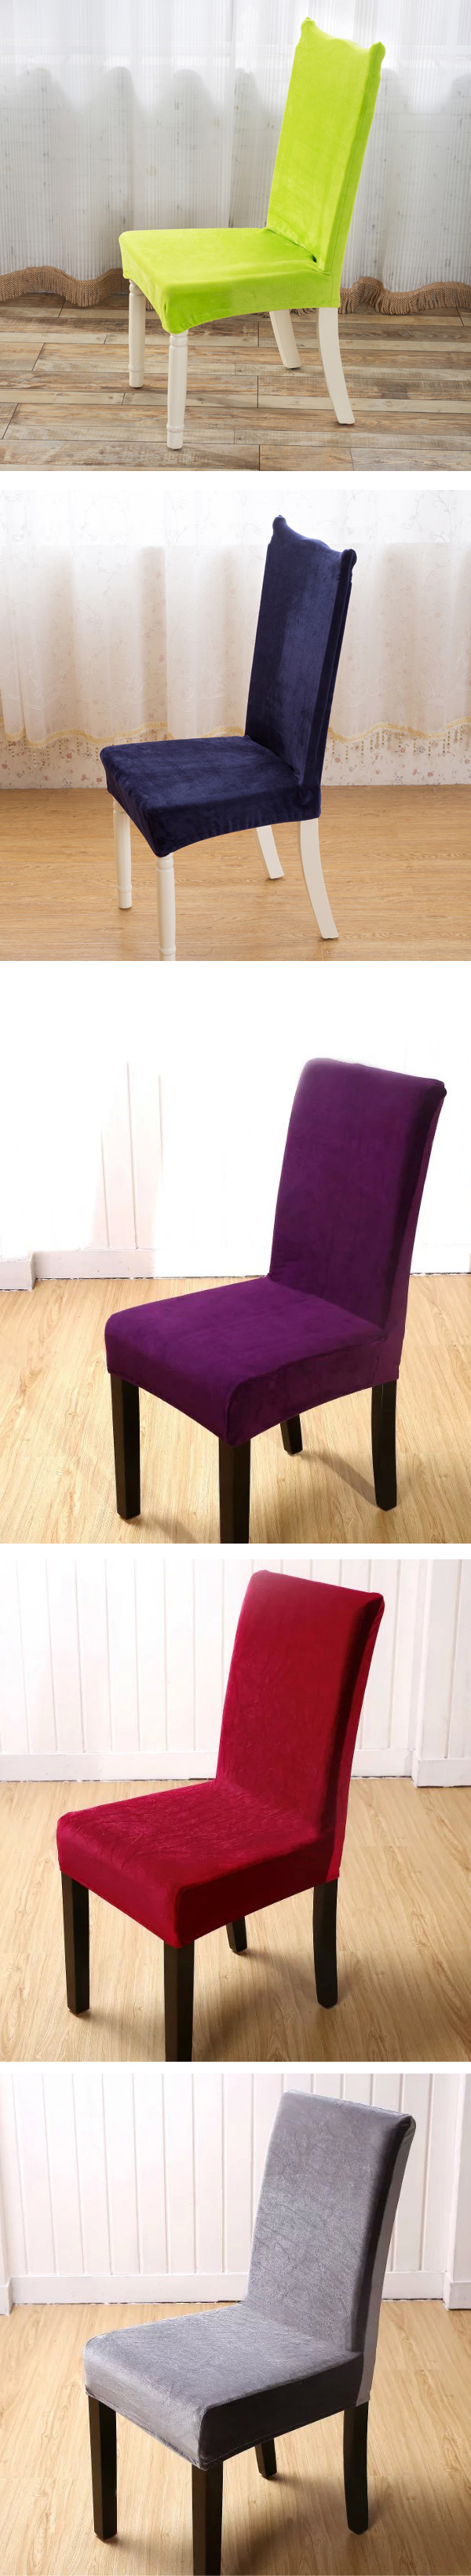 Plush-Thicken-Antifouling-Elastic-Stretch-Spandex-Chair-Seat-Cover-Party-Dining-Room-Wedding-Decor-1088204-2